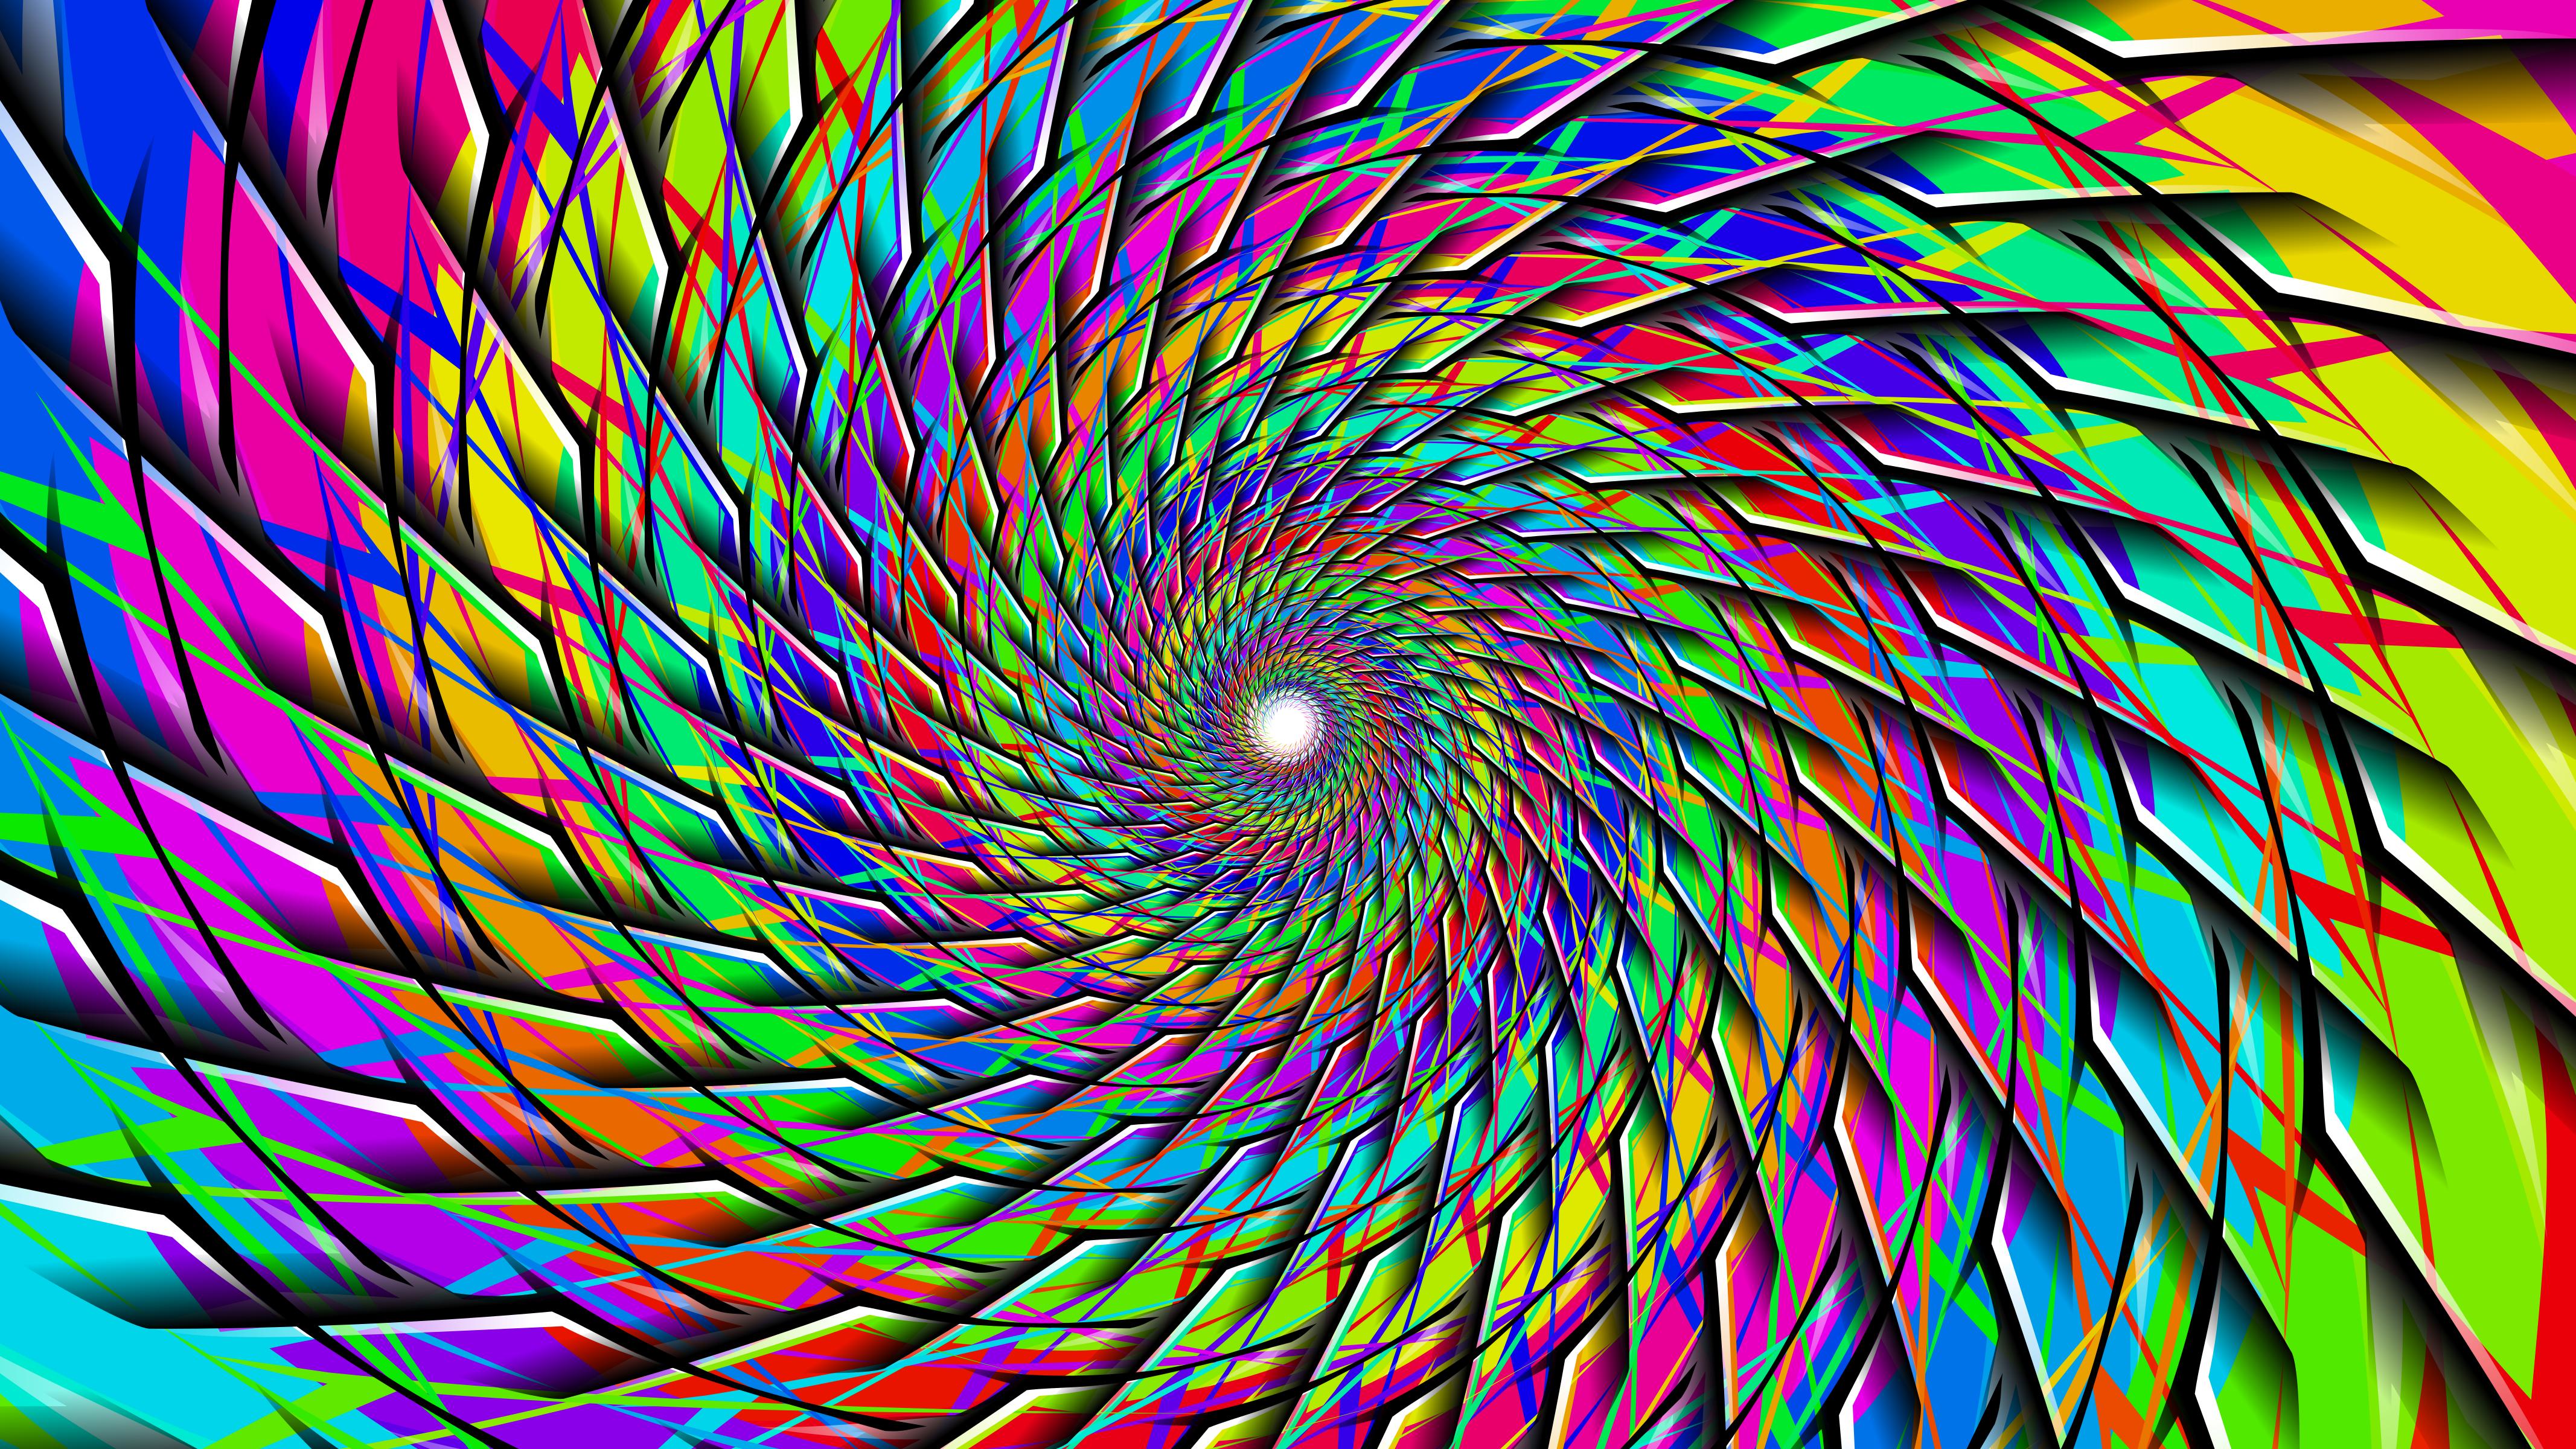 Psychedelic Spiral Wallpapers - 4k, HD Psychedelic Spiral Backgrounds ...